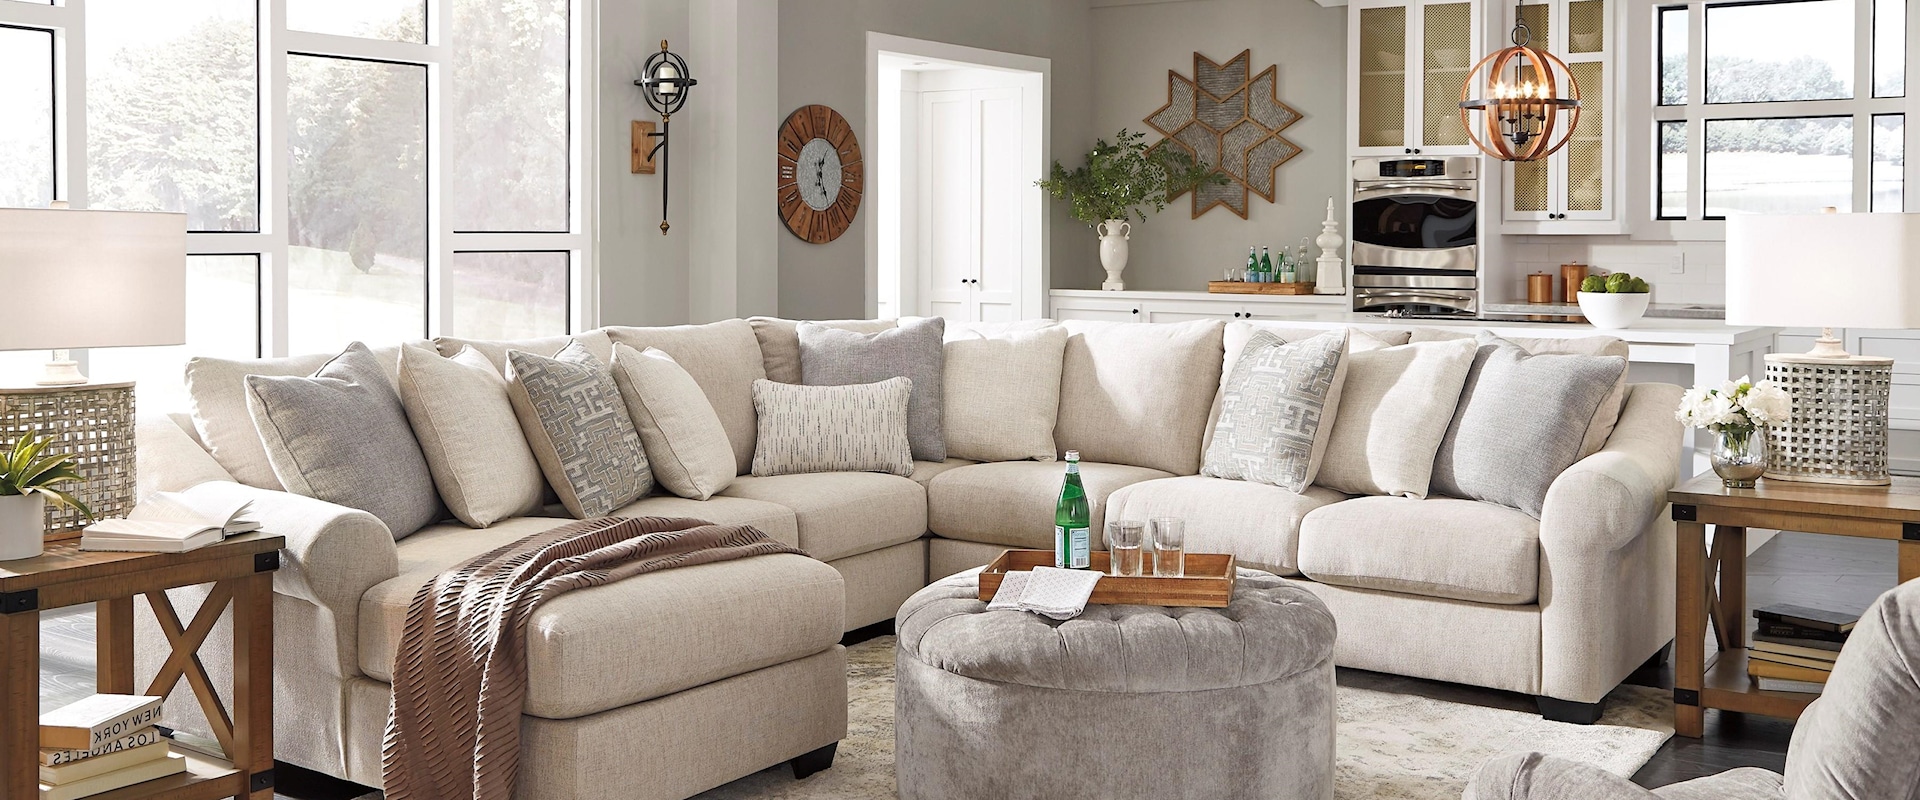 Linen 5 Piece Sectional Sofa Chaise Set with Accent Ottoman